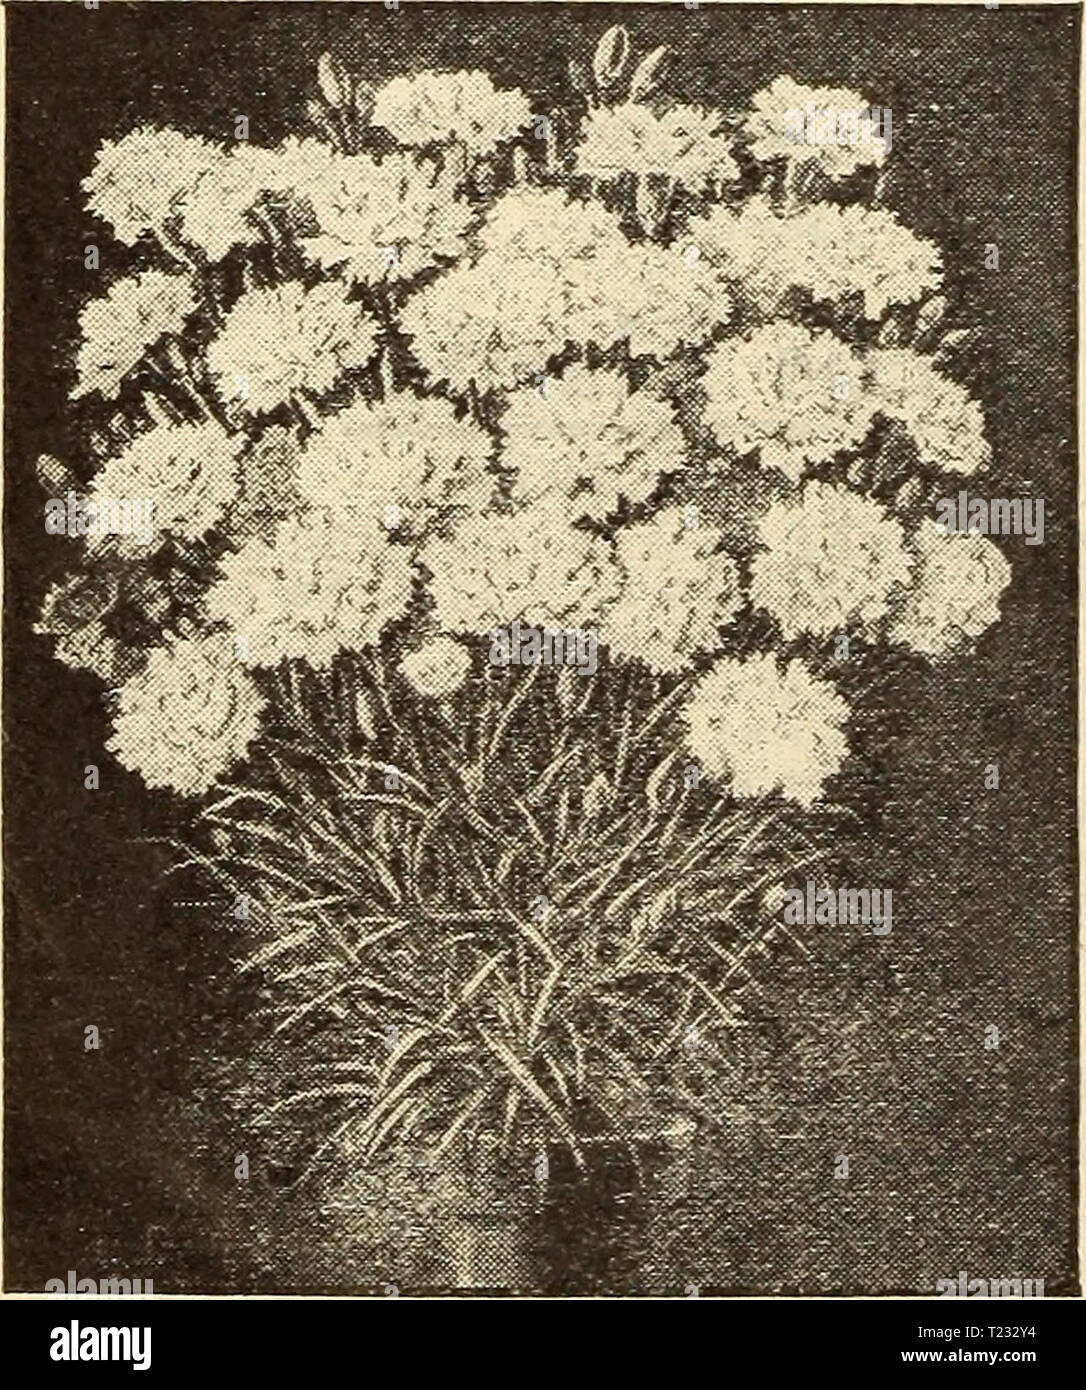 Archive image from page 85 of Dingee guide to rose culture Dingee guide to rose culture  dingeeguidetoros19ding Year: 1909  CARNATION, BOSTON MAKKET    Novelty Set of New Carnations 15c.,each, 50c. for 5; set of 12, $1, postpaid. Order as the 'Novelty Set' Aristocrat. Large, deep pink flow- I ers; long stems. Splendid- j Lady Bountiful. Pure white. Im- | mense blooms.  May Naylor. Superb crimson. New and beautiful. Mrs. Patten. White, variegated pink. Grand. Beacon. The foremost scarlet. Harlowarden. The best standard crimson on the market. Marshall's Red. Deep, gorgeous red. Very distinct. W Stock Photo